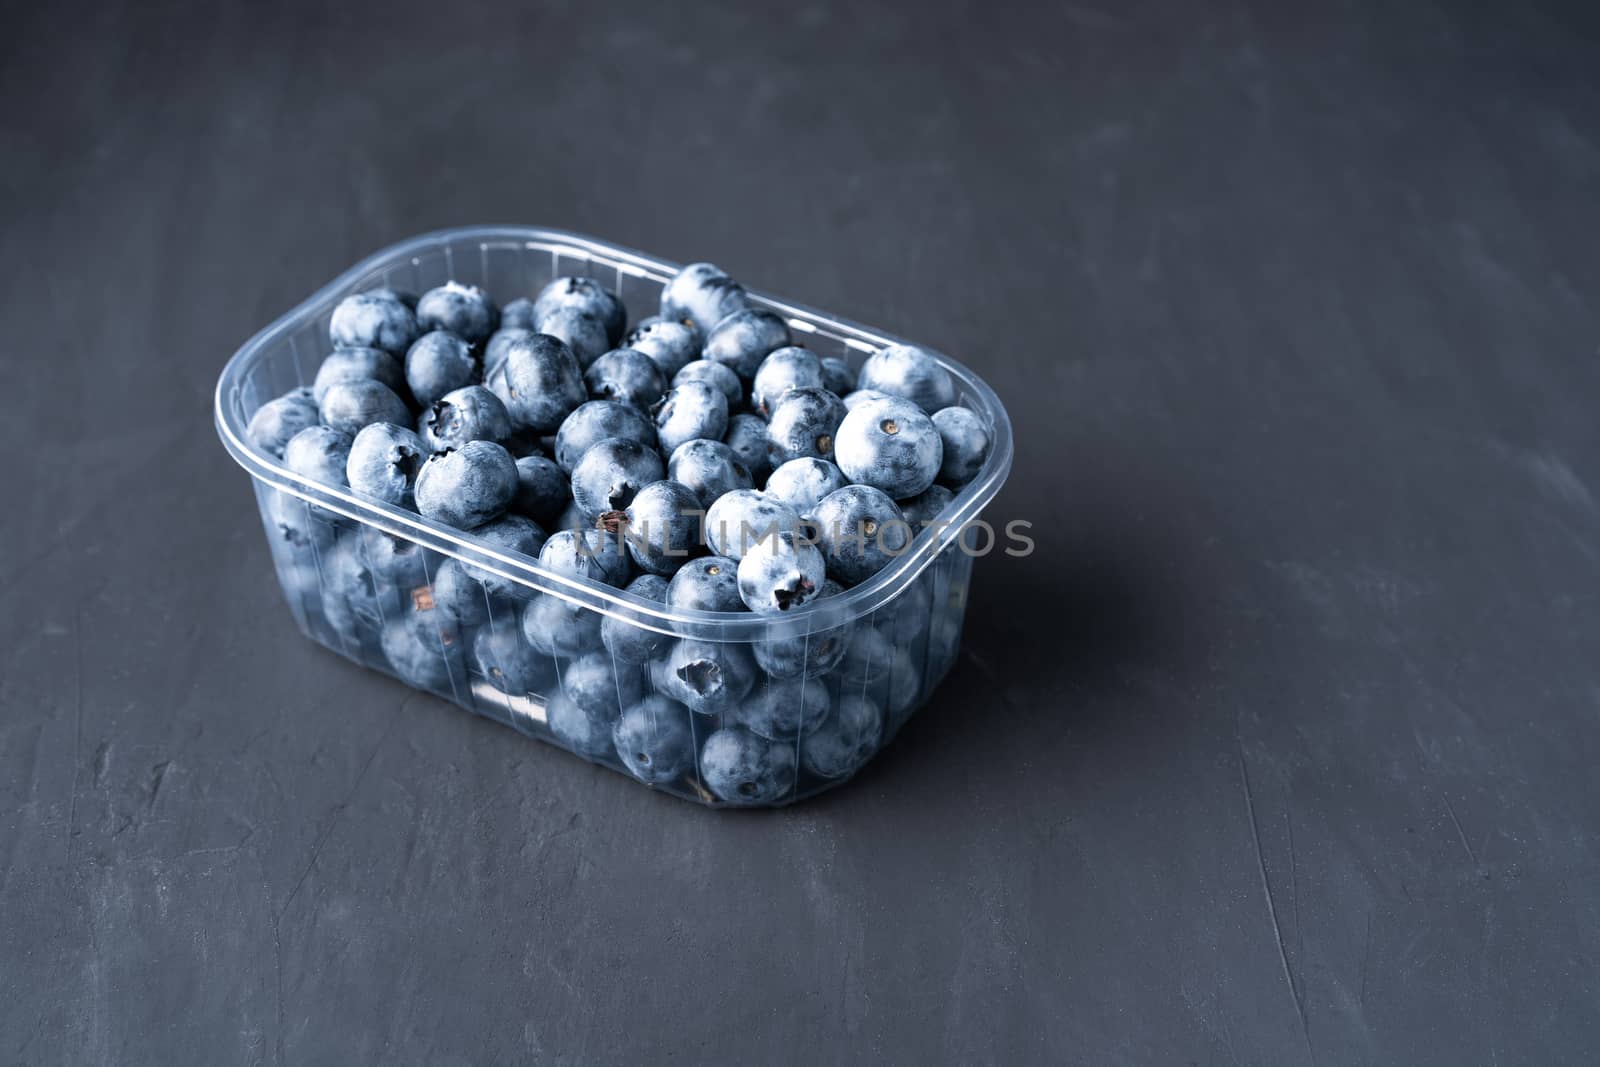 Tasty juicy raw blueberries in a plastic container on a black dark background. Packaging for berries in a supermarket on store shelves.